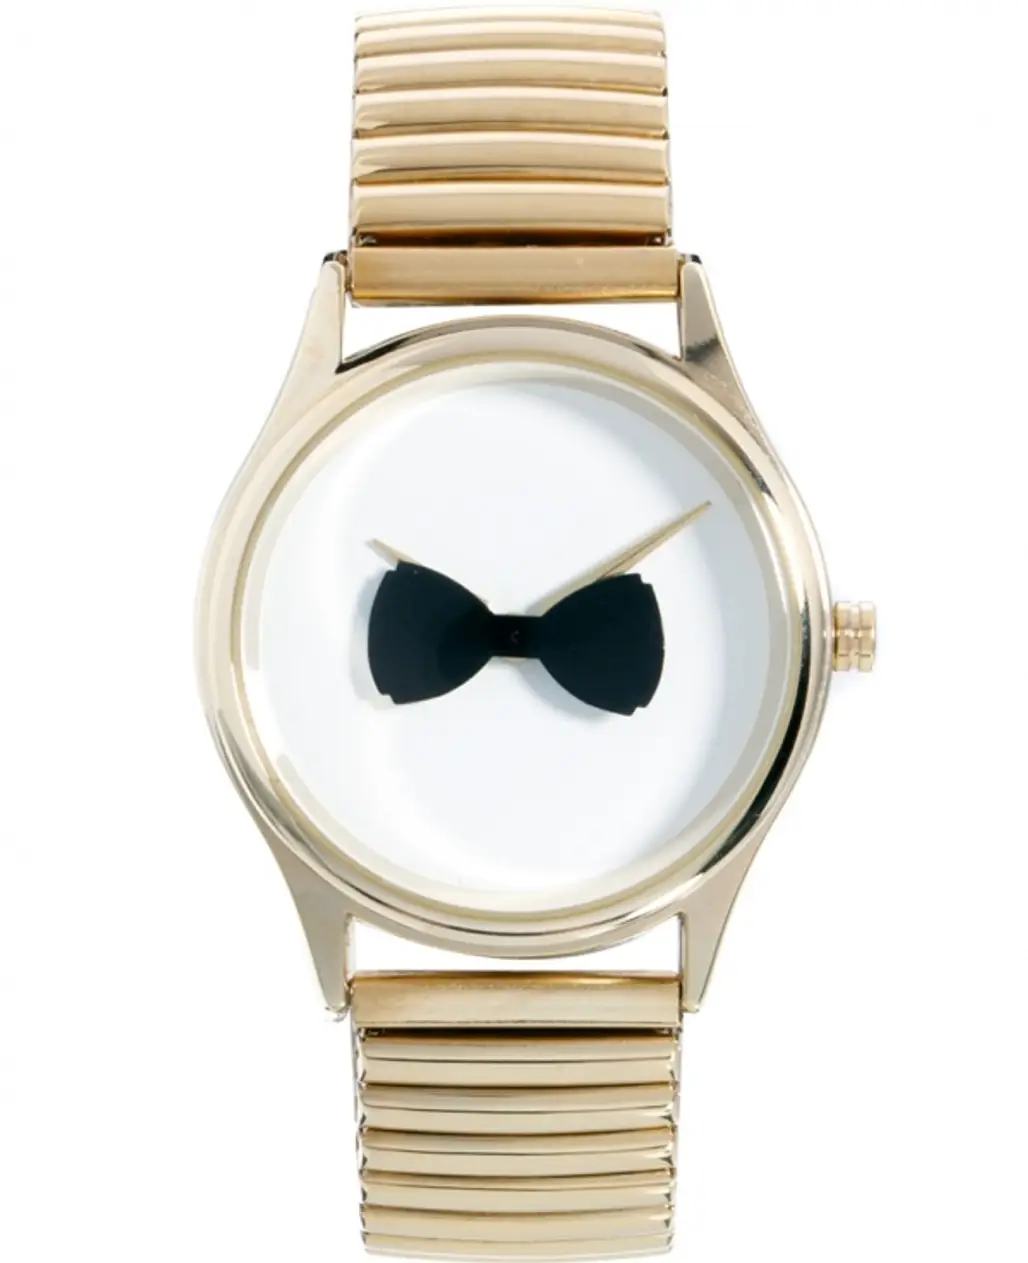 Rotating Bow Tie Watch